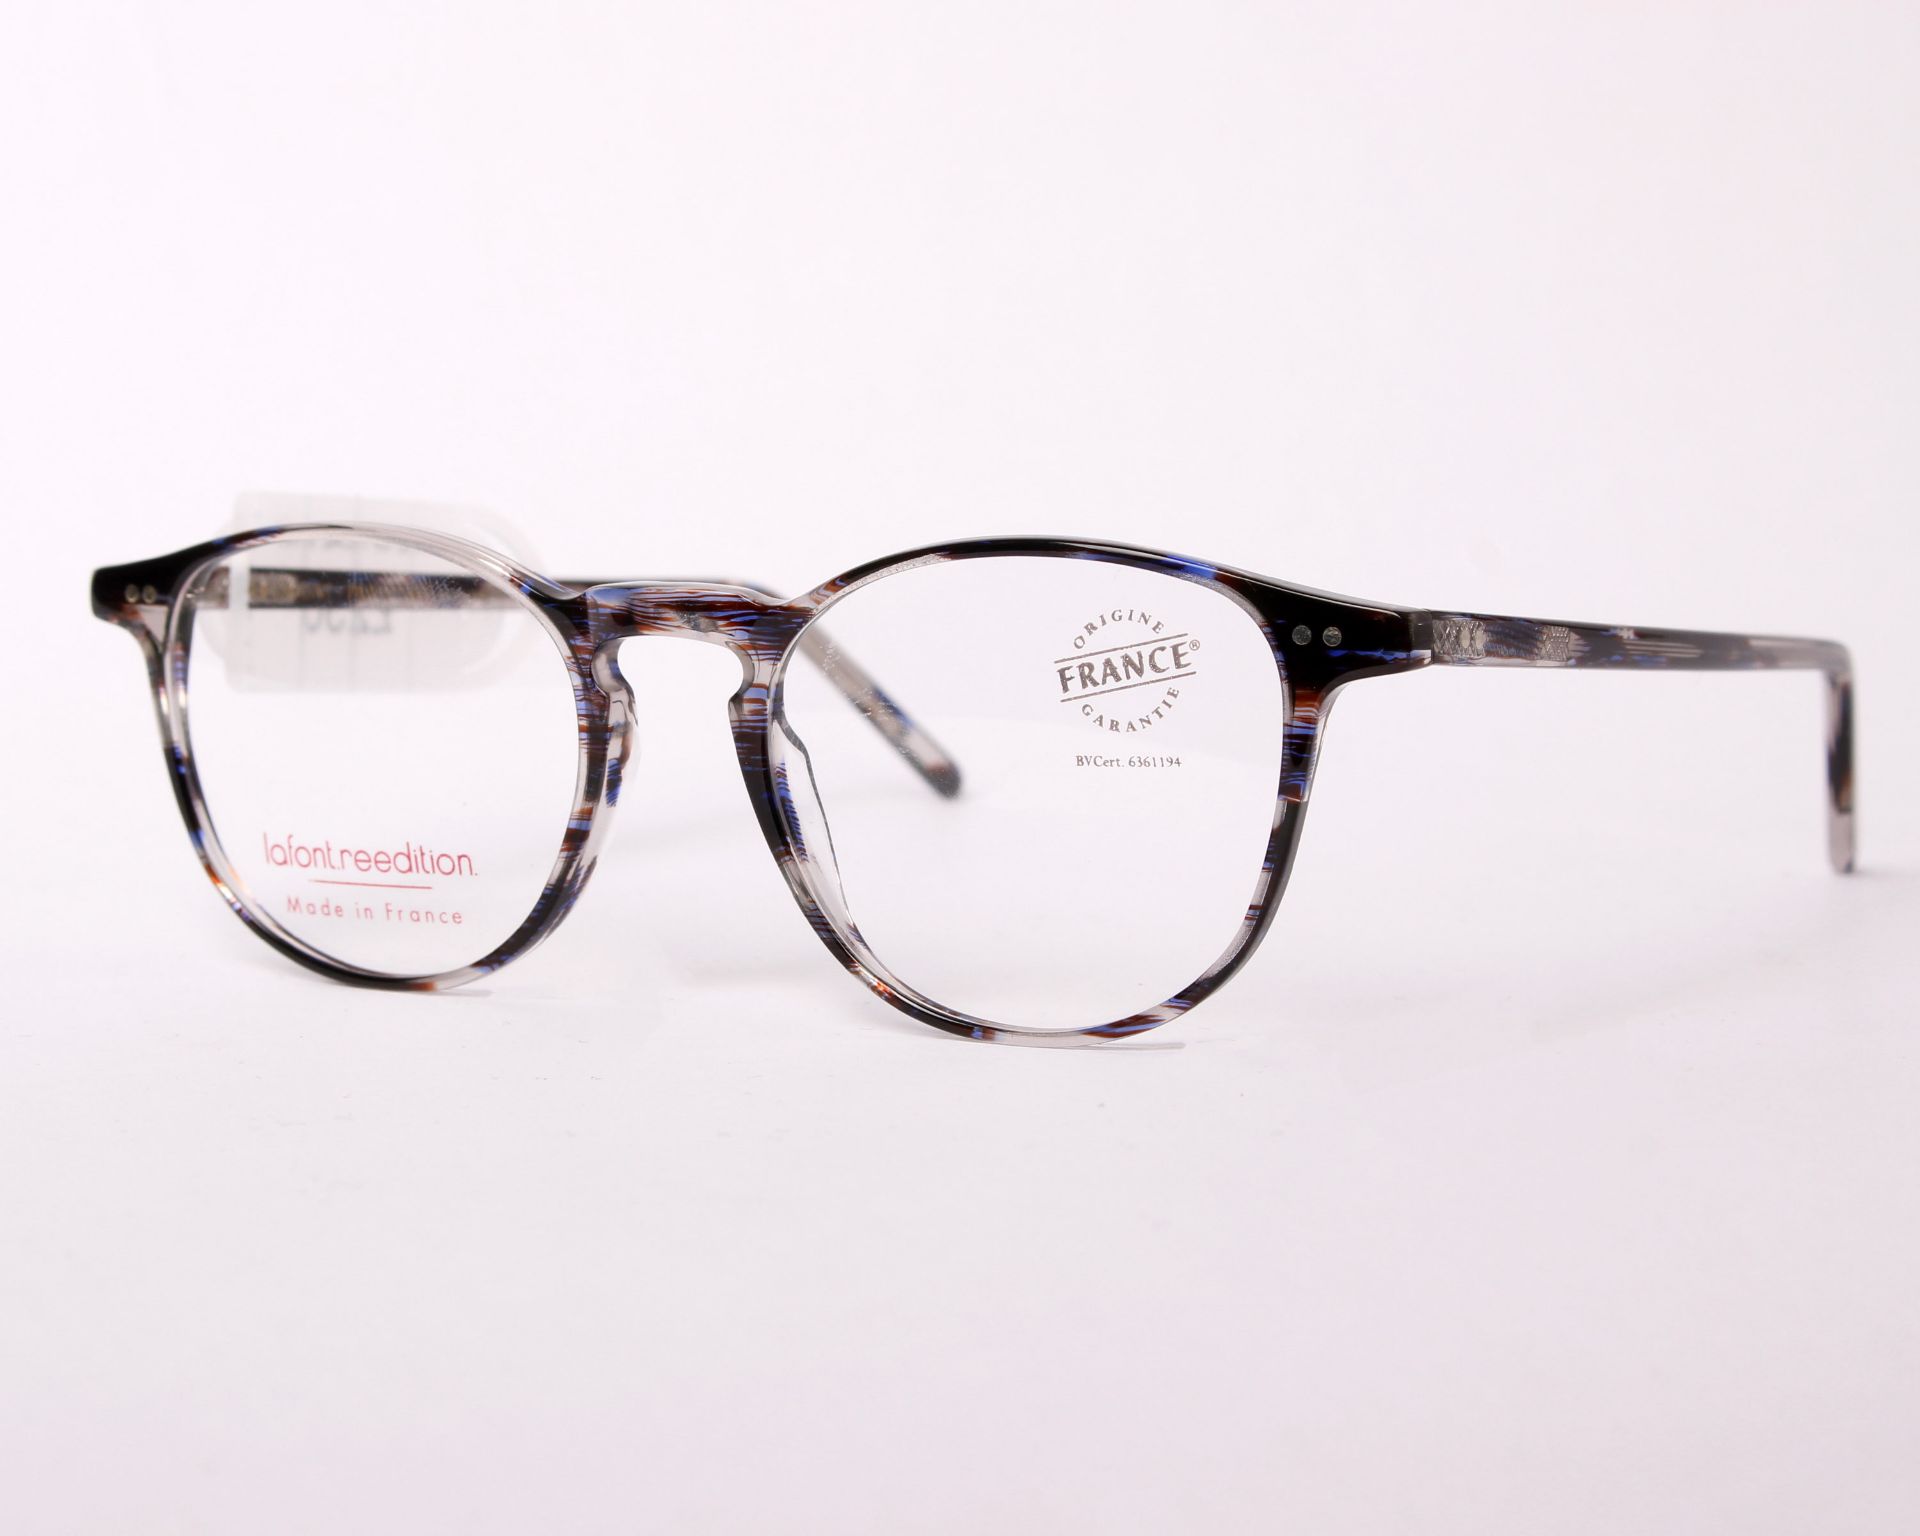 A pair of as new Lafont Reedition glasses frames with clear glass (RRP £230). - Image 3 of 3